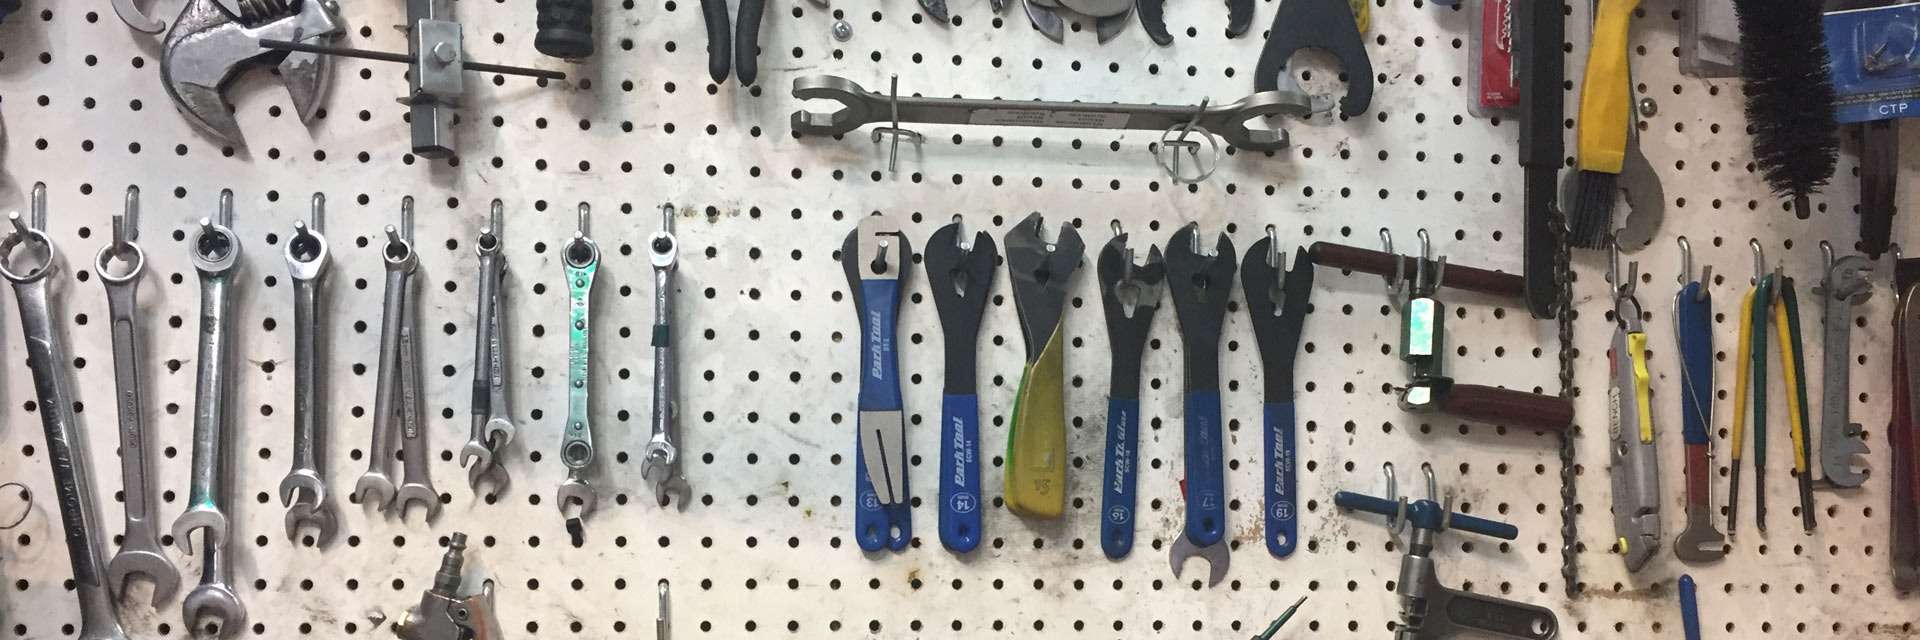 Wall of bicycle tools.